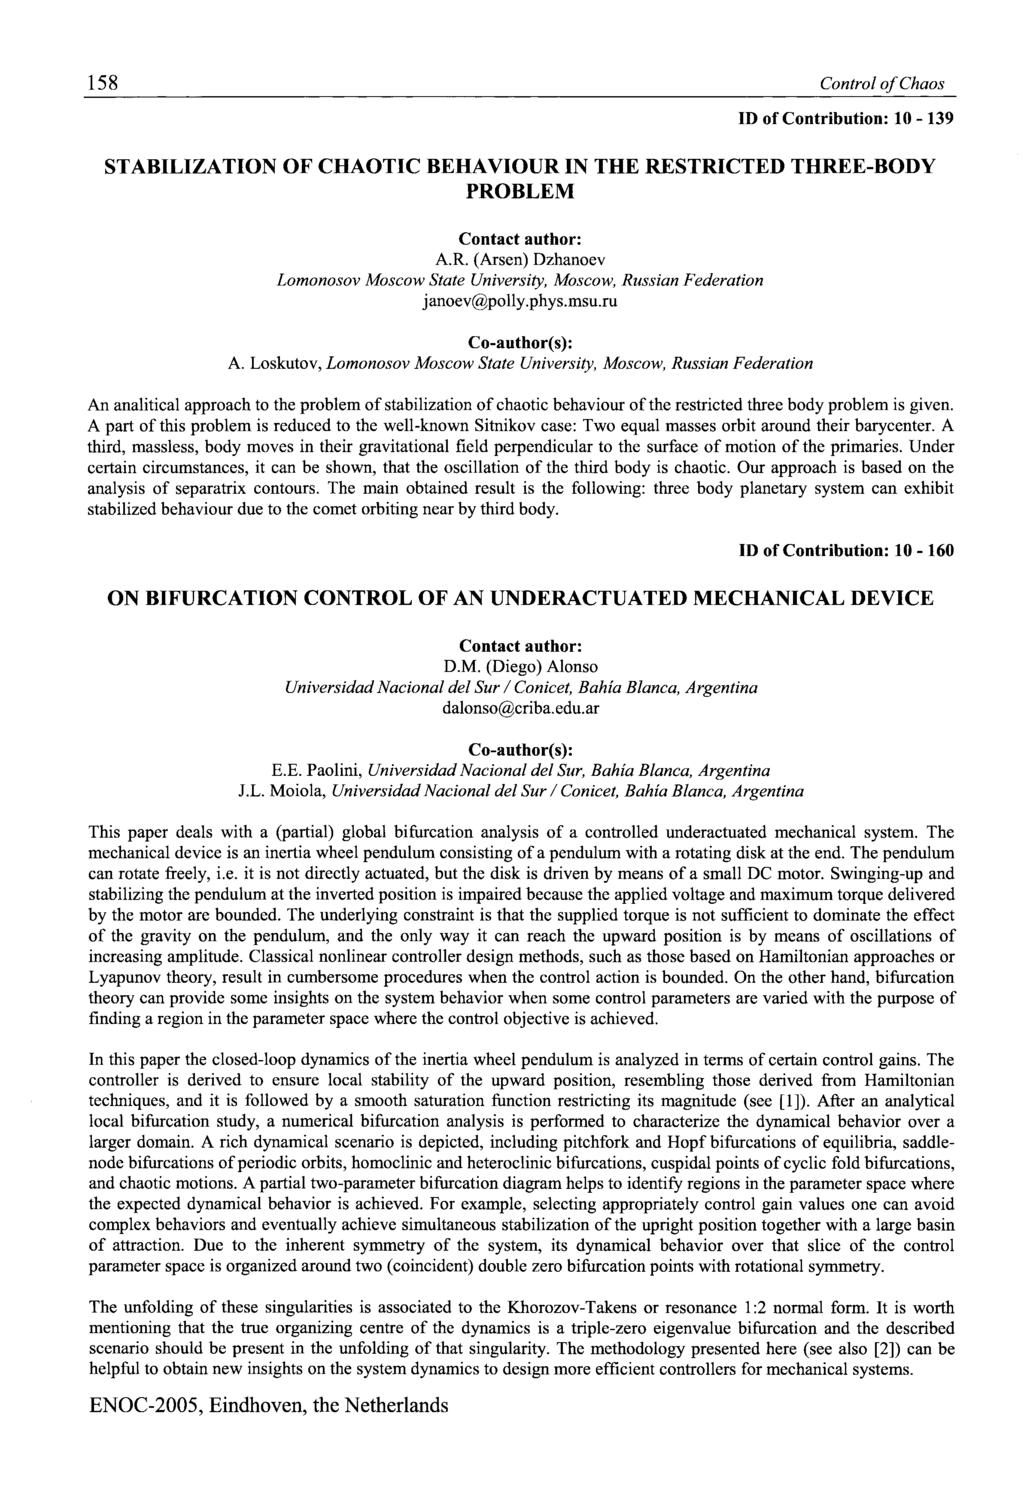 158 Control of Chaos ID of Contribotion: 10-139 STABILIZATION OF CHAOTIC BEHA VIOUR IN THE RESTRICTED THREE-BODY PROBLEM Contact aothor: A.R. (Arsen) Dzhanoev Lomonosov Moscow State University, Moscow, Russian Pederation janoev@polly.